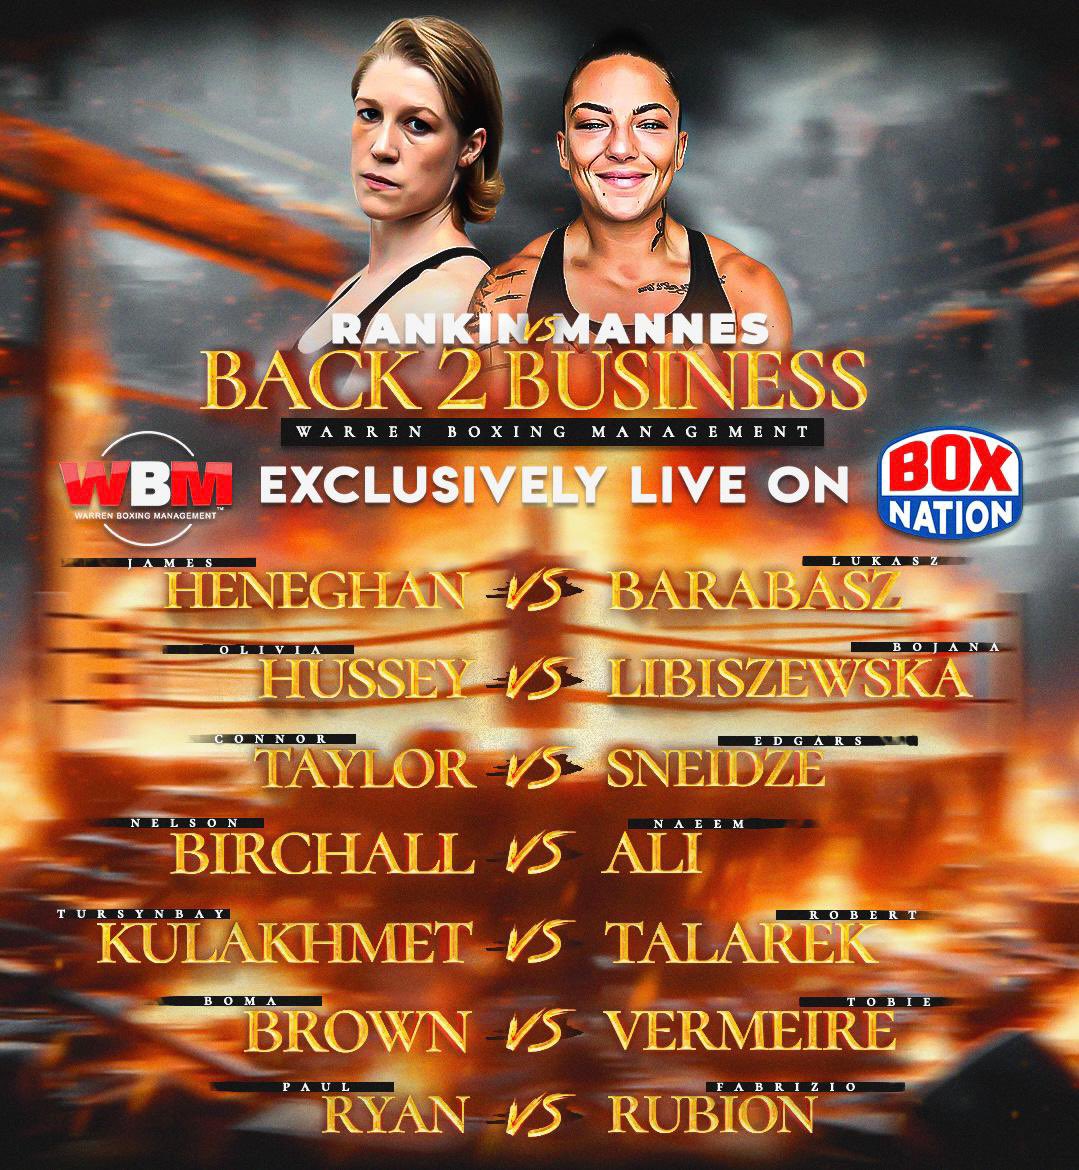 𝐌𝐀𝐍𝐍𝐄𝐒 🆚 𝐌𝐀𝐂𝐇𝐈𝐍𝐄 Must win fight for Hannah Rankin tonight as she looks to keep her dreams of becoming 3x world champion alive. Naomi Mannes comes with plenty of ambition and has only lost to Lauren Price and Kirstie Bavington…. Rankin has been hard at work -